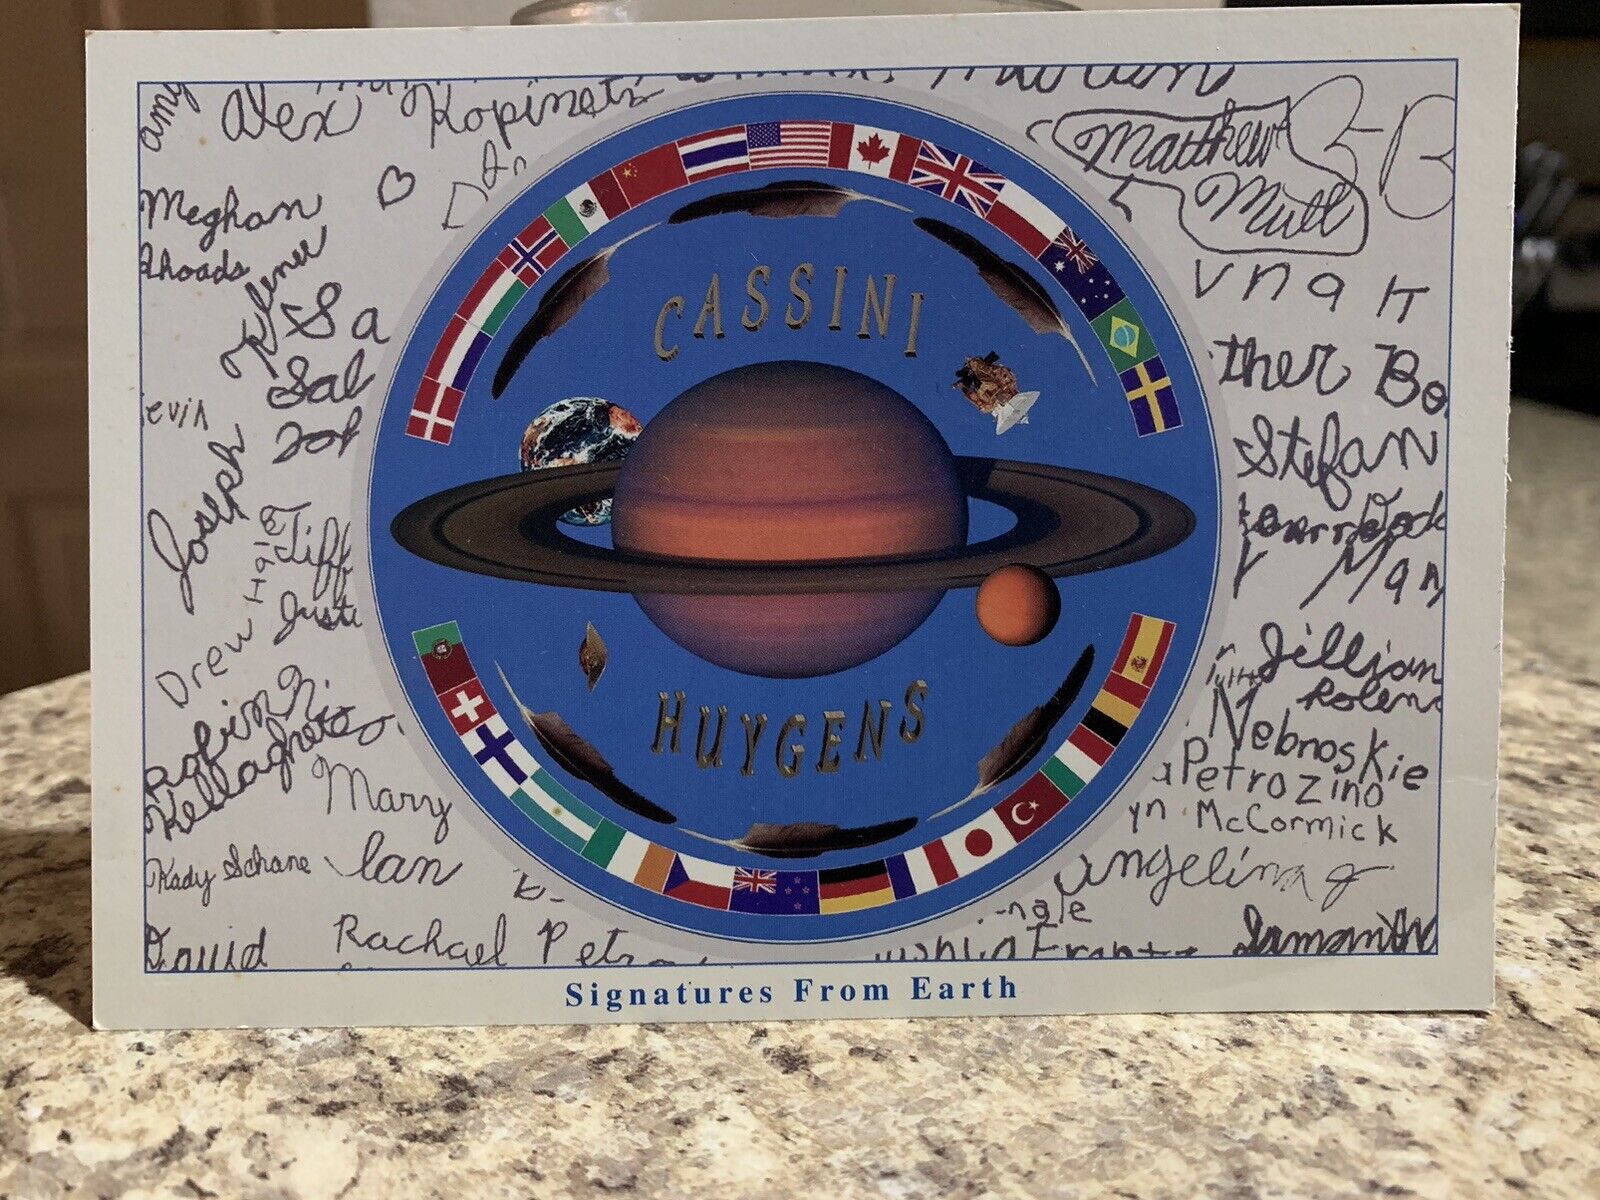 Rare 1997 Cassini/Huygens Mission Launch POSTCARD NASA-Signatures From Earth